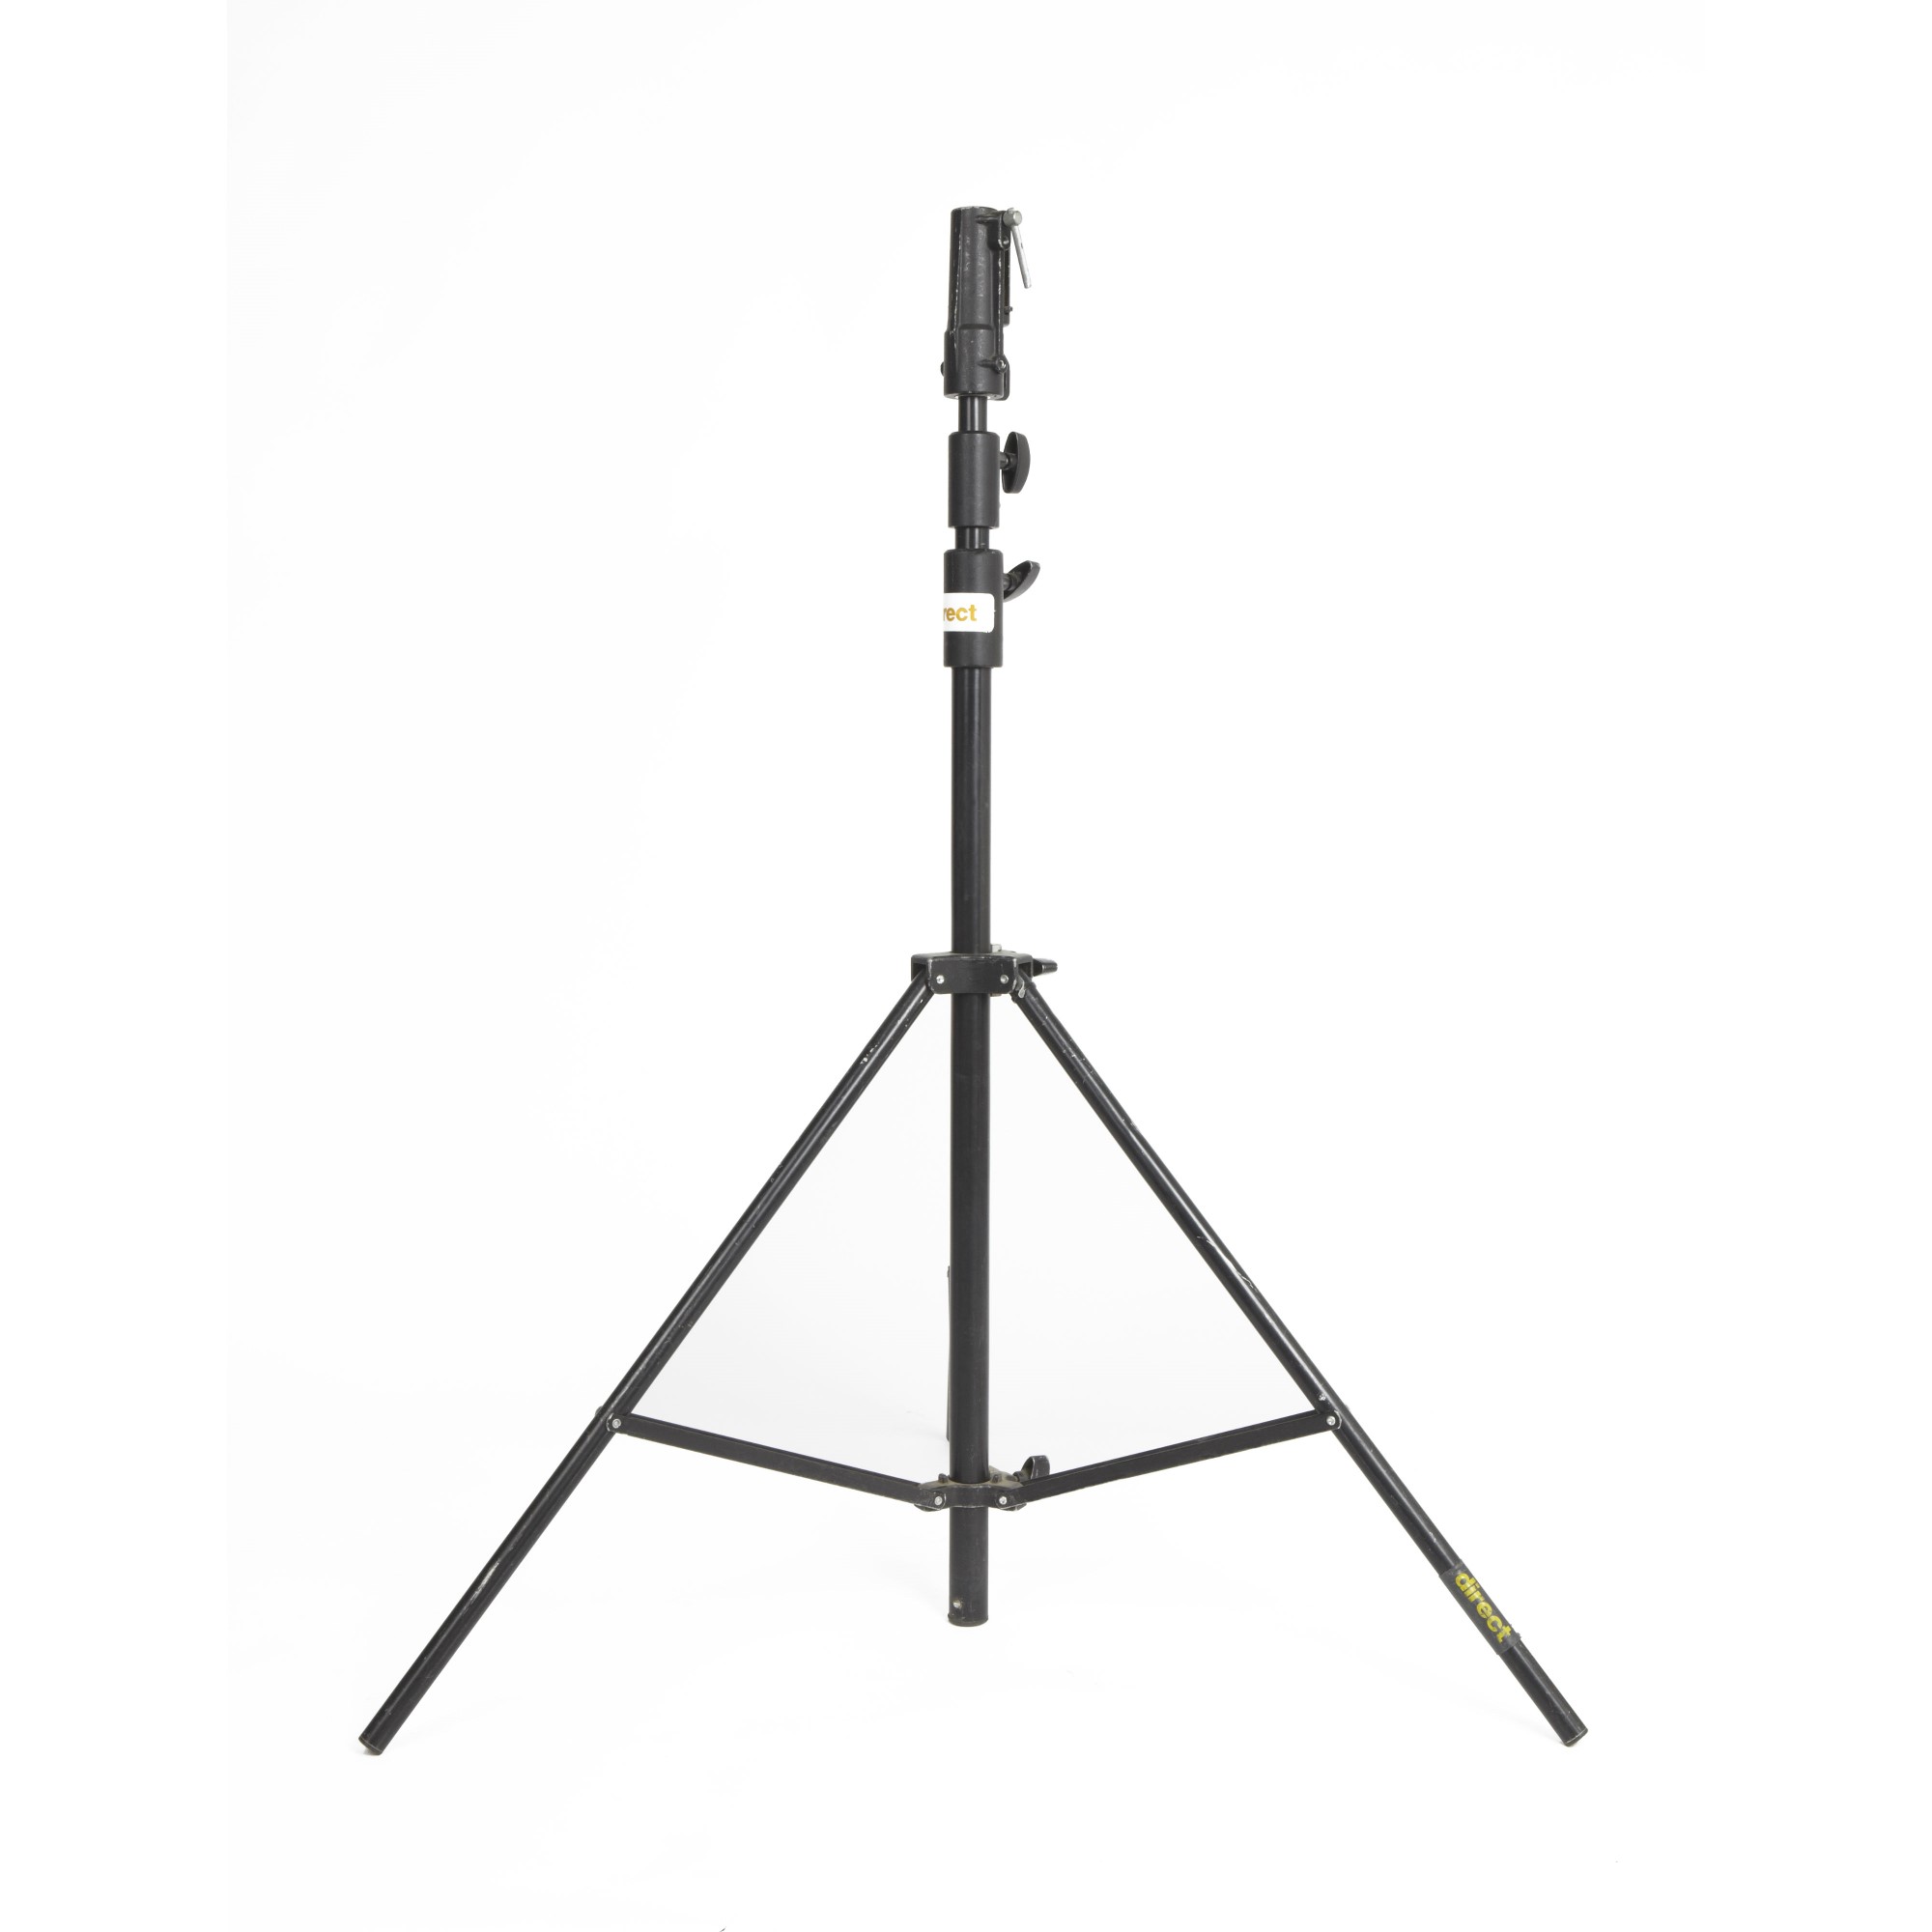 Pup Stand 2K (124 - 315cm)